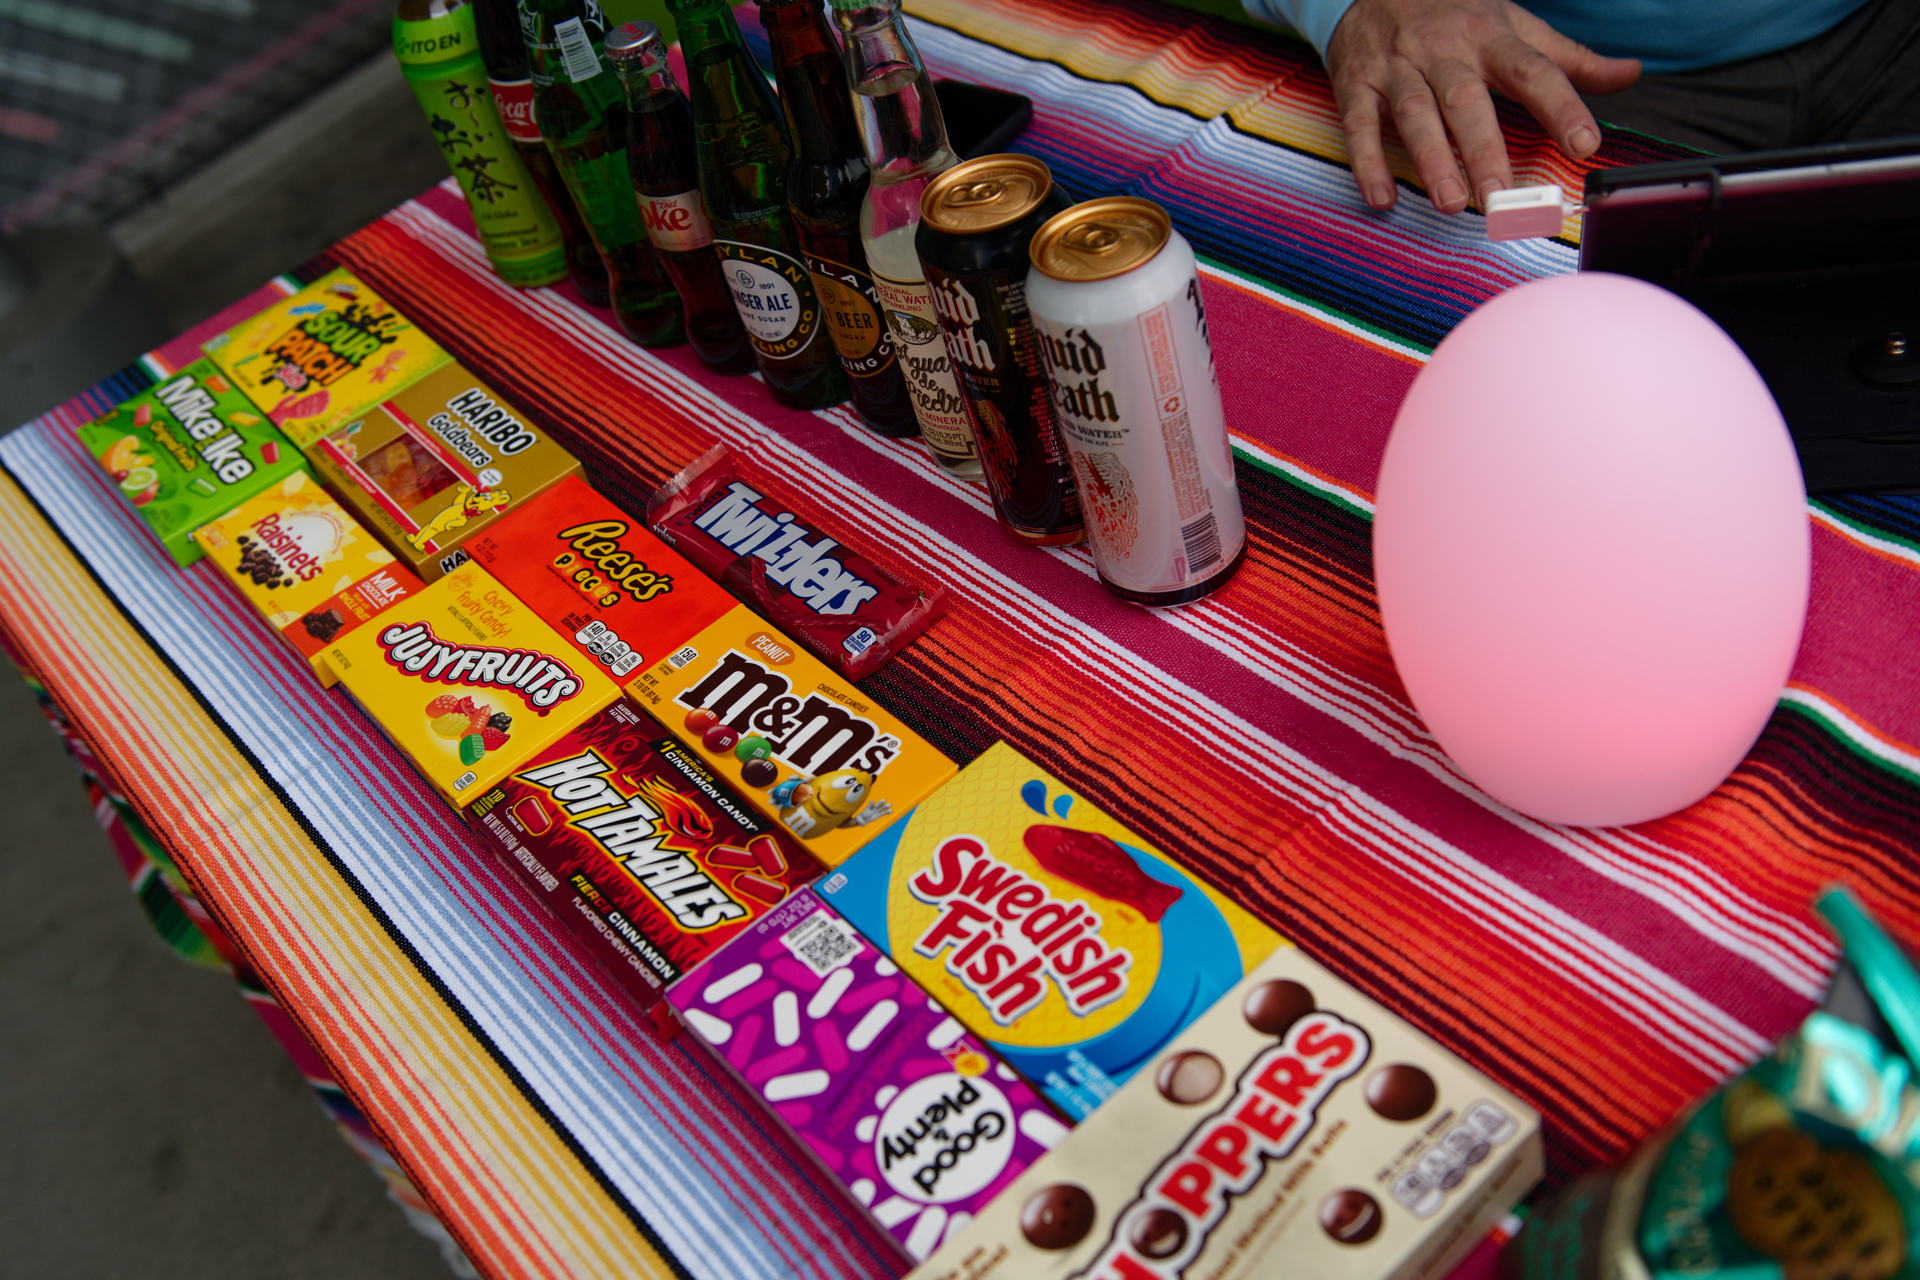 Boxed candies and canned beverages displayed on a colorful Mexican blanket